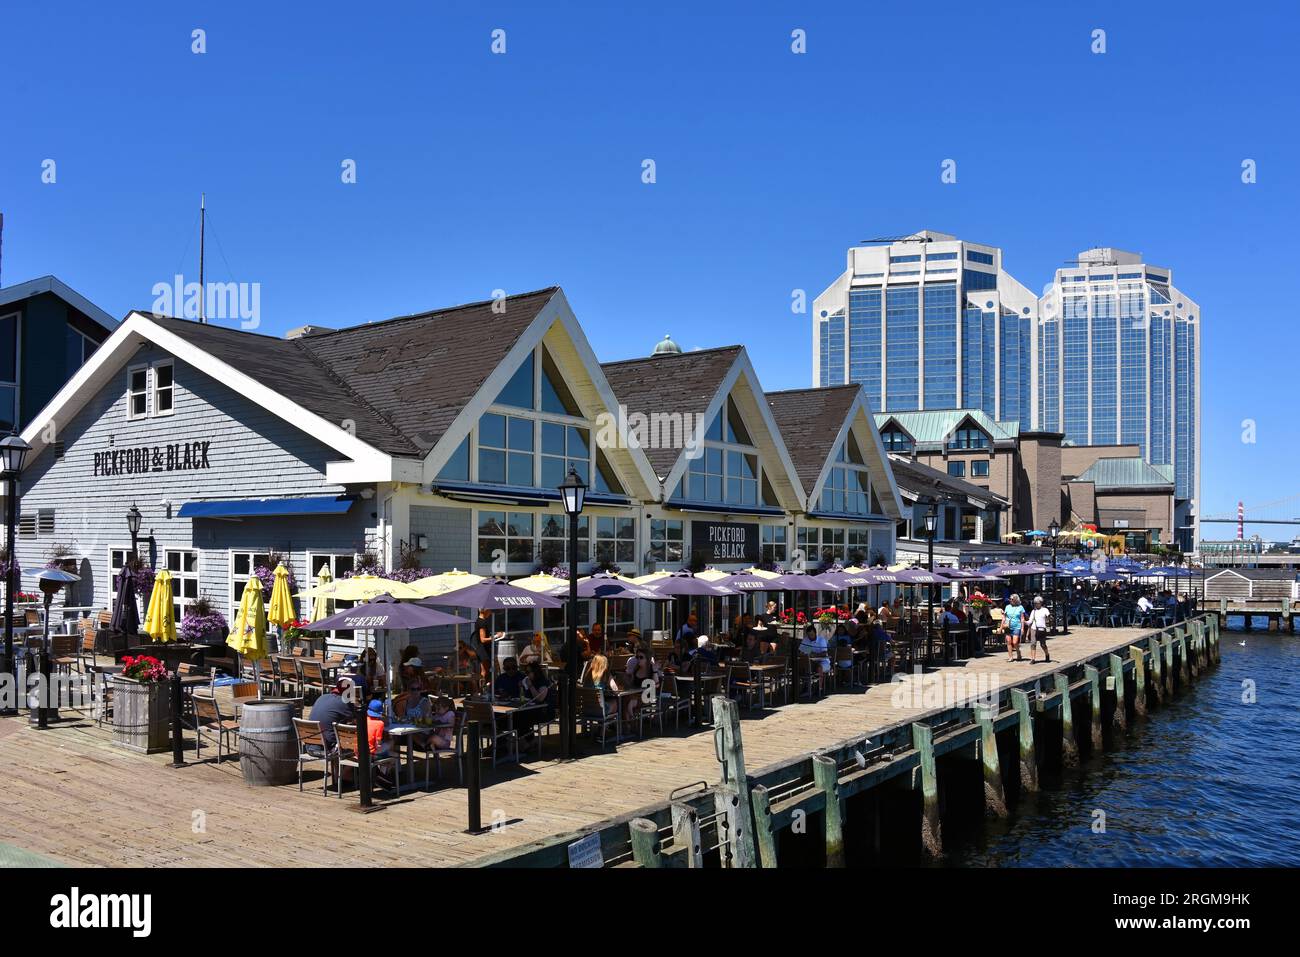 Halifax, Canada - August 2, 2023: People dining on the patio of Pitchford and Black, a restaurant on the Halifax Waterfront which is a tourist attract Stock Photo